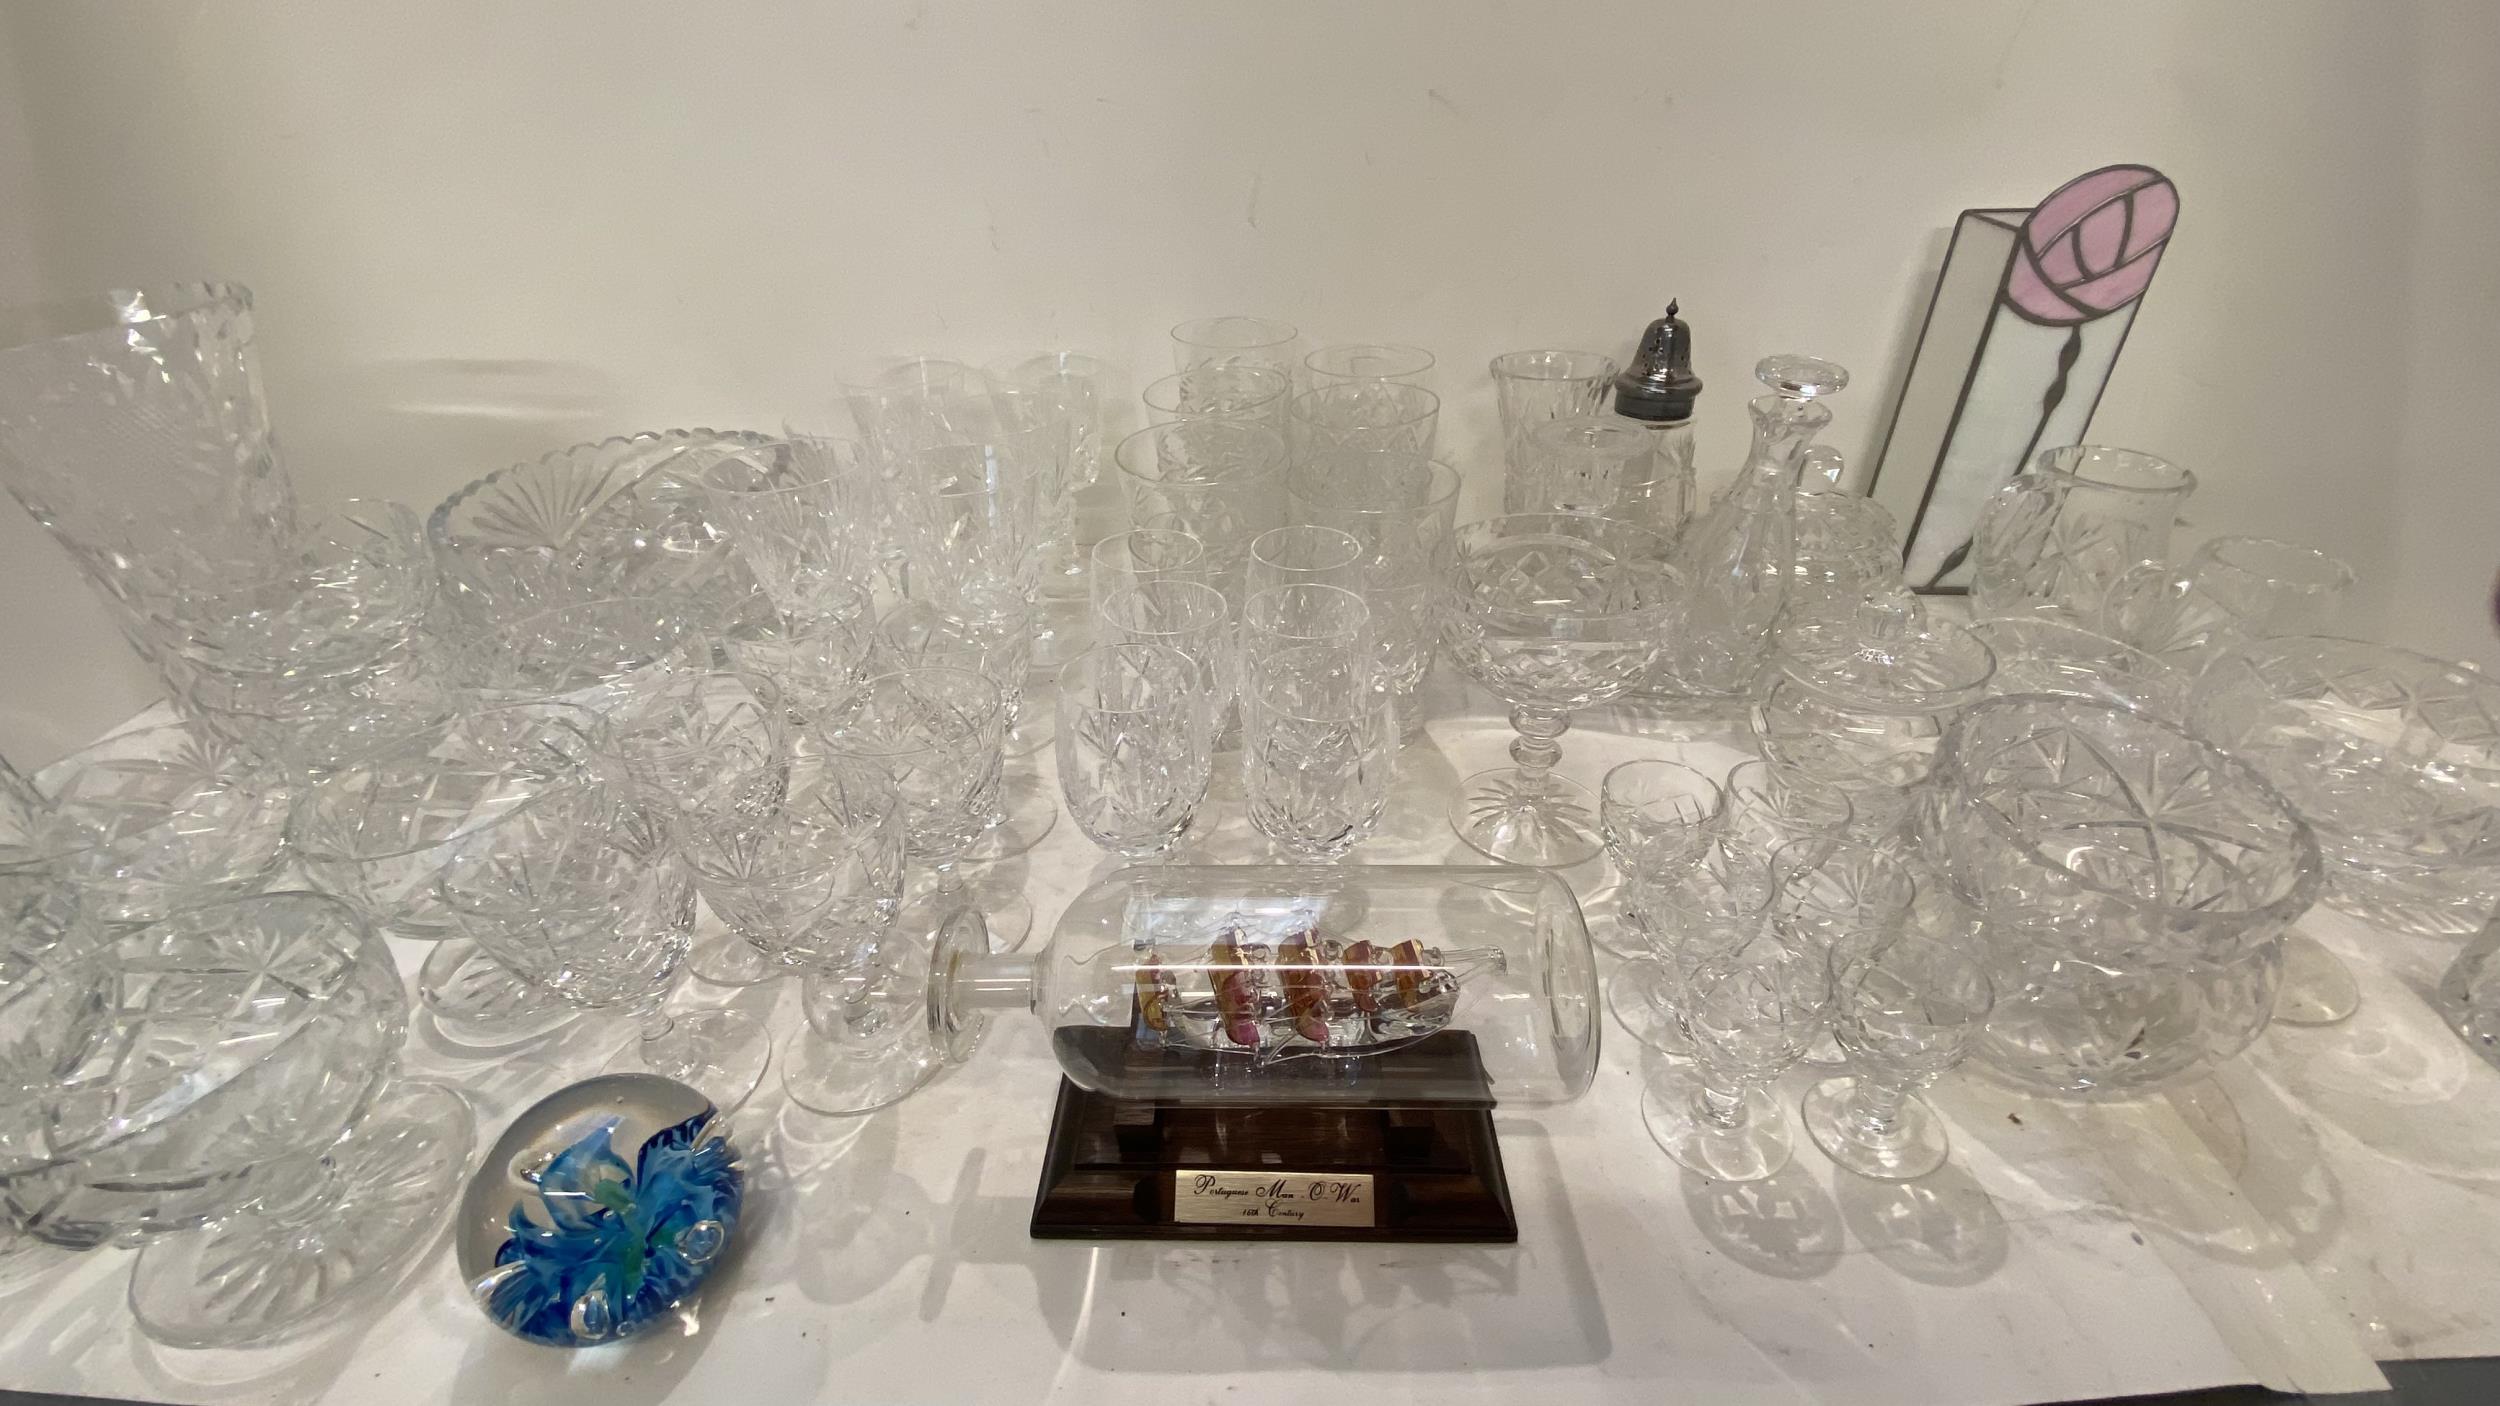 Large qty of glass wear including decanters, vases, wine glassed, tumblers etc. - Image 3 of 7